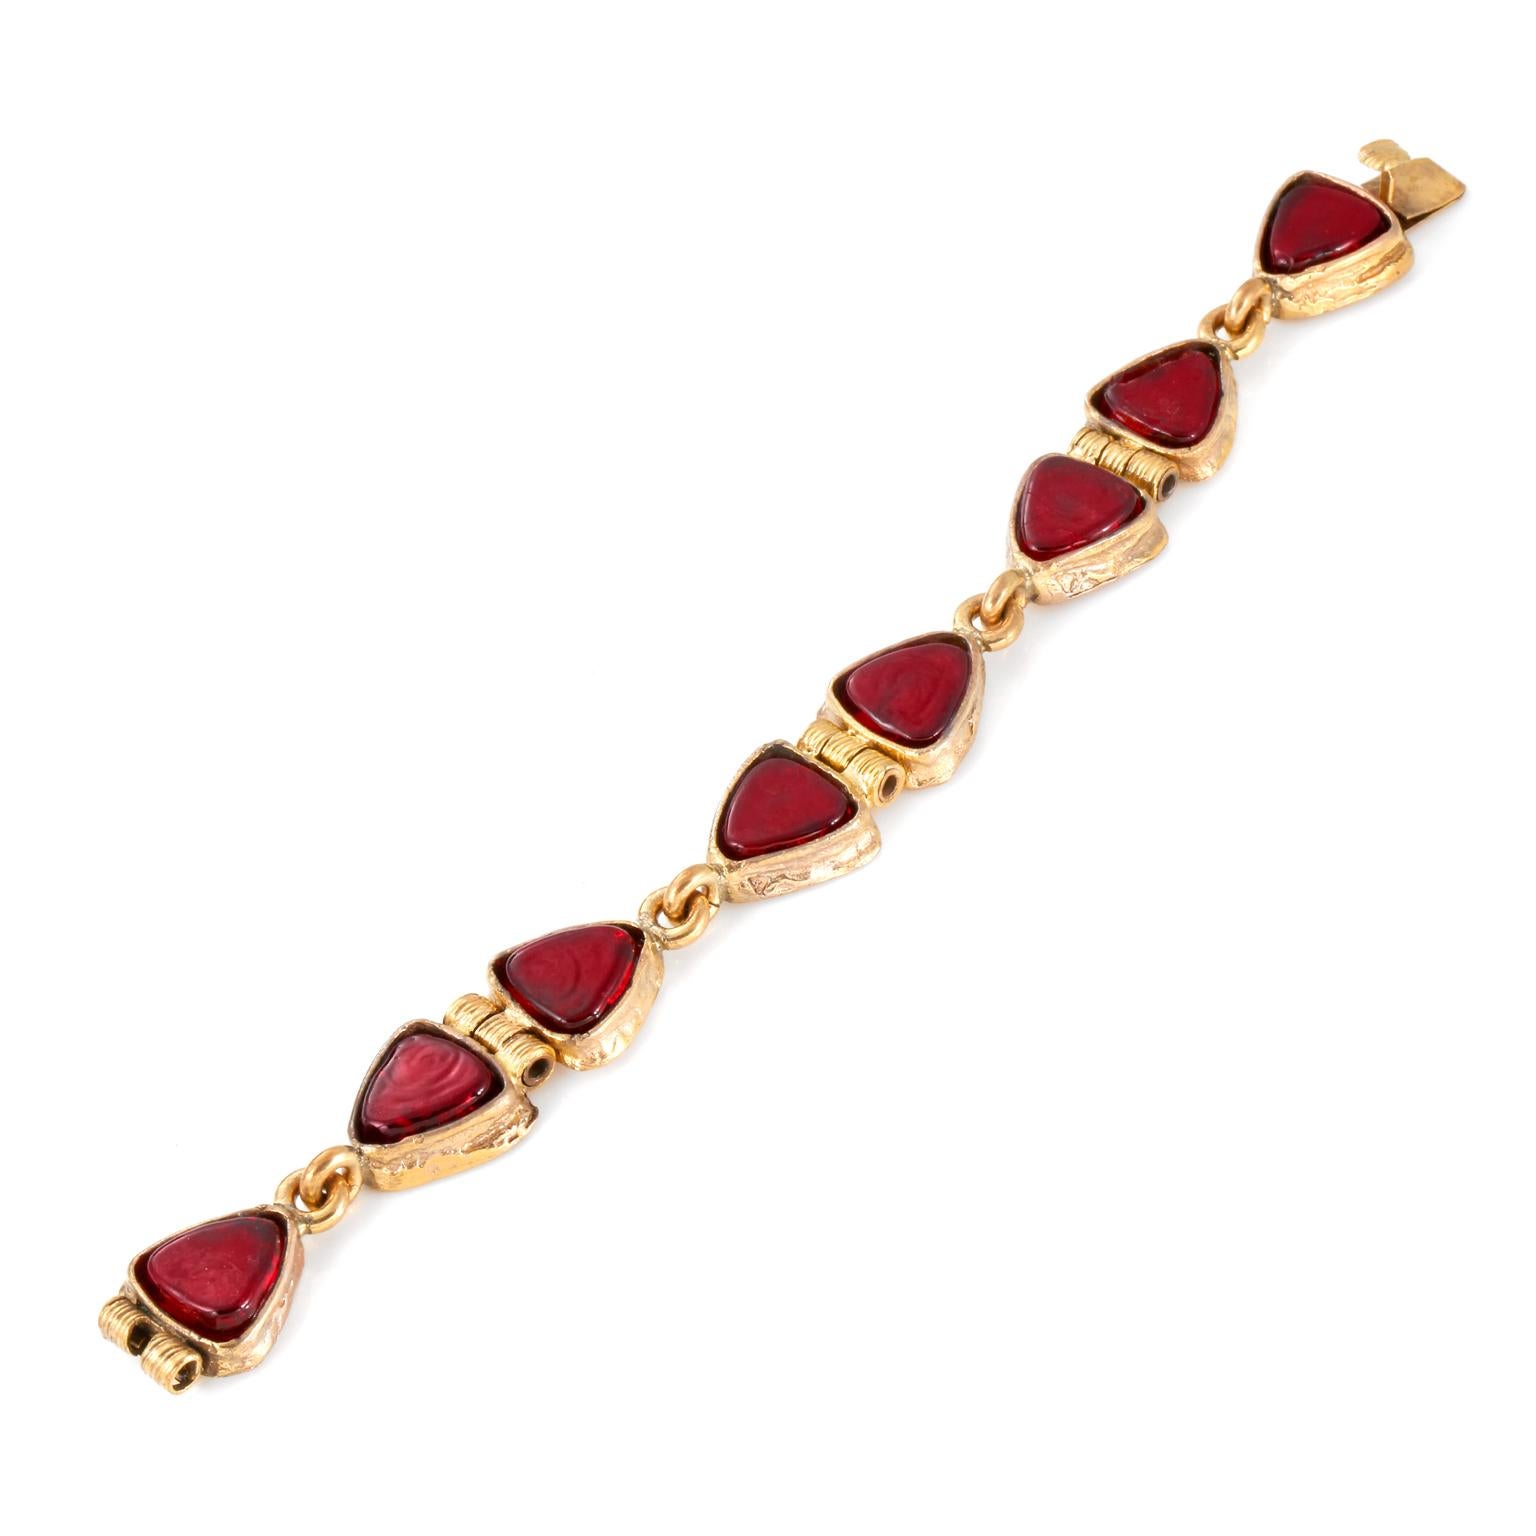 This authentic Chanel Red Gripoix Bracelet is in exceptionally good vintage condition.  It is a very early Chanel piece from the 1954-1971 era. Deep red Gripoix glass stones set in gold tone metal.  Approximately 8 inches.    Pouch or box included.